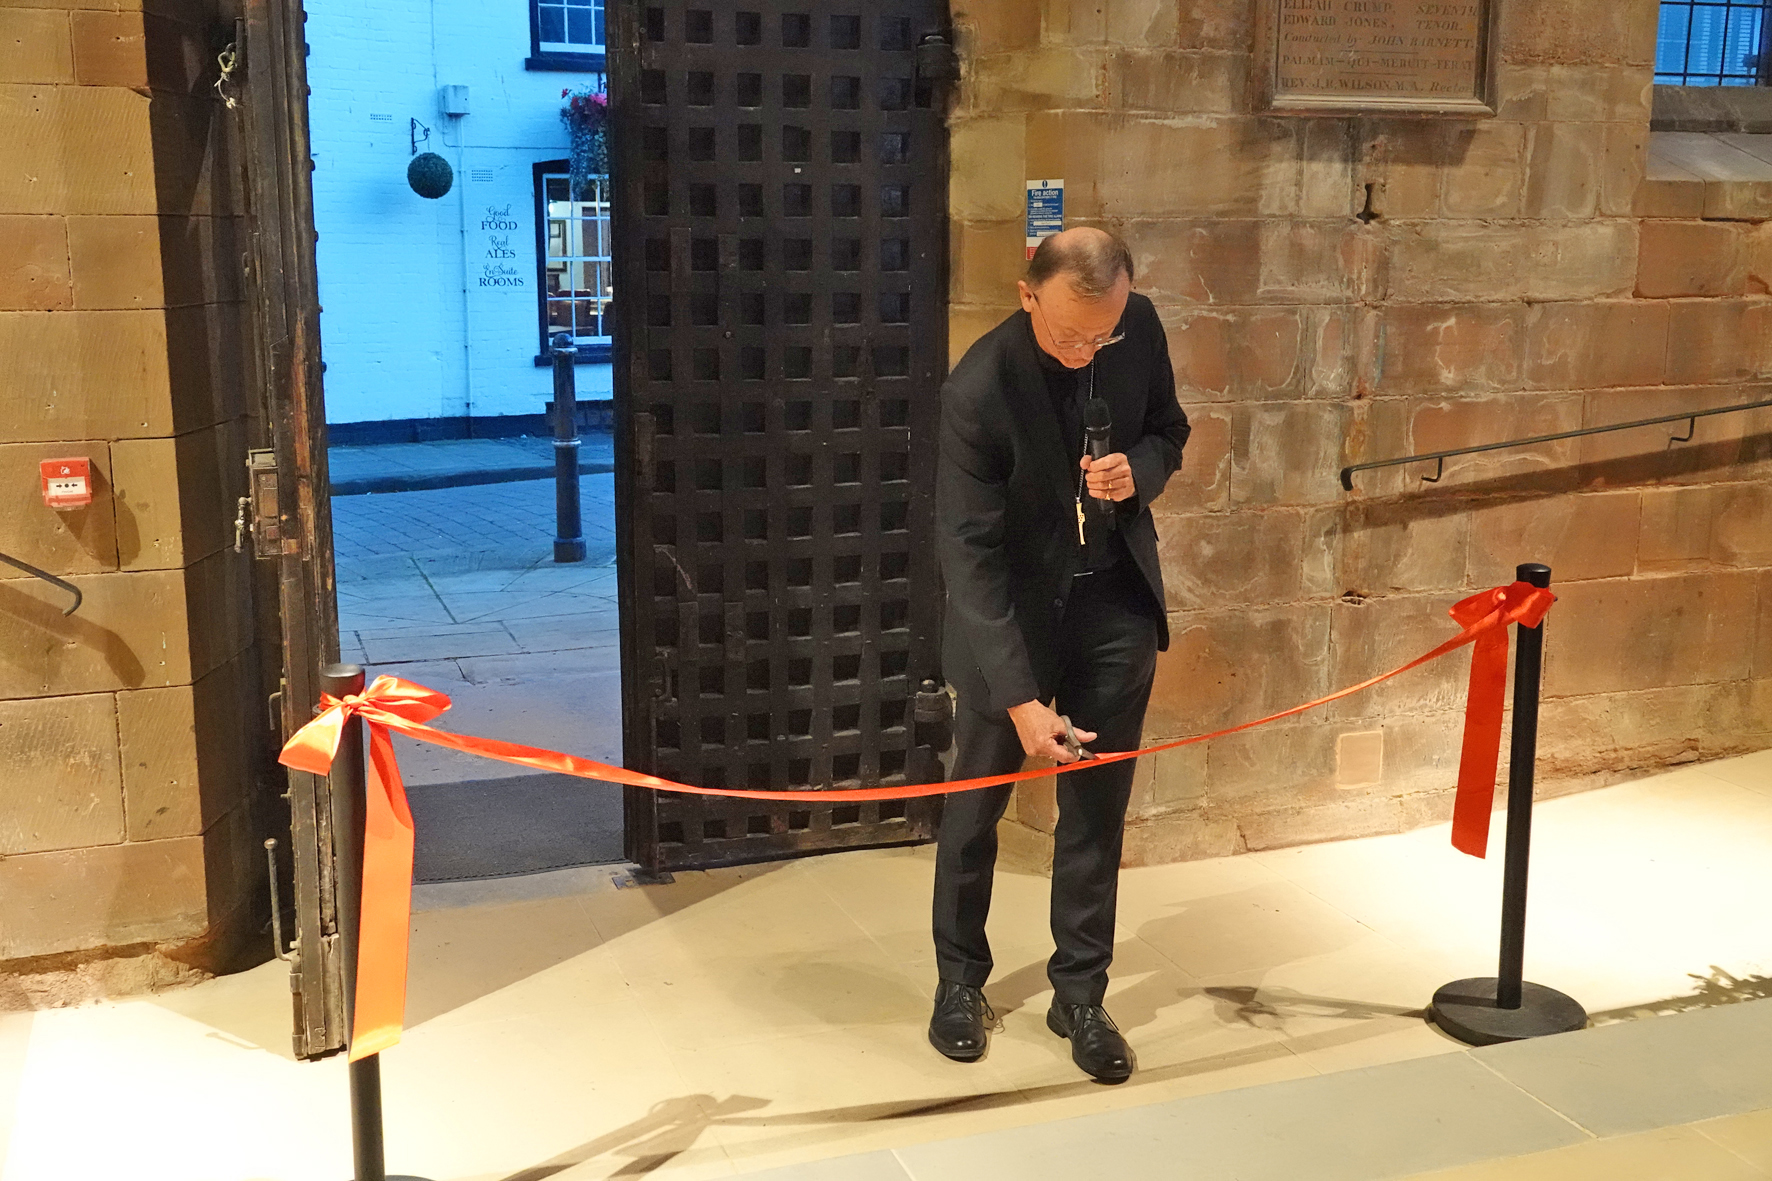 Bishop John cuts a red ribbon by the door of St Helen's Church